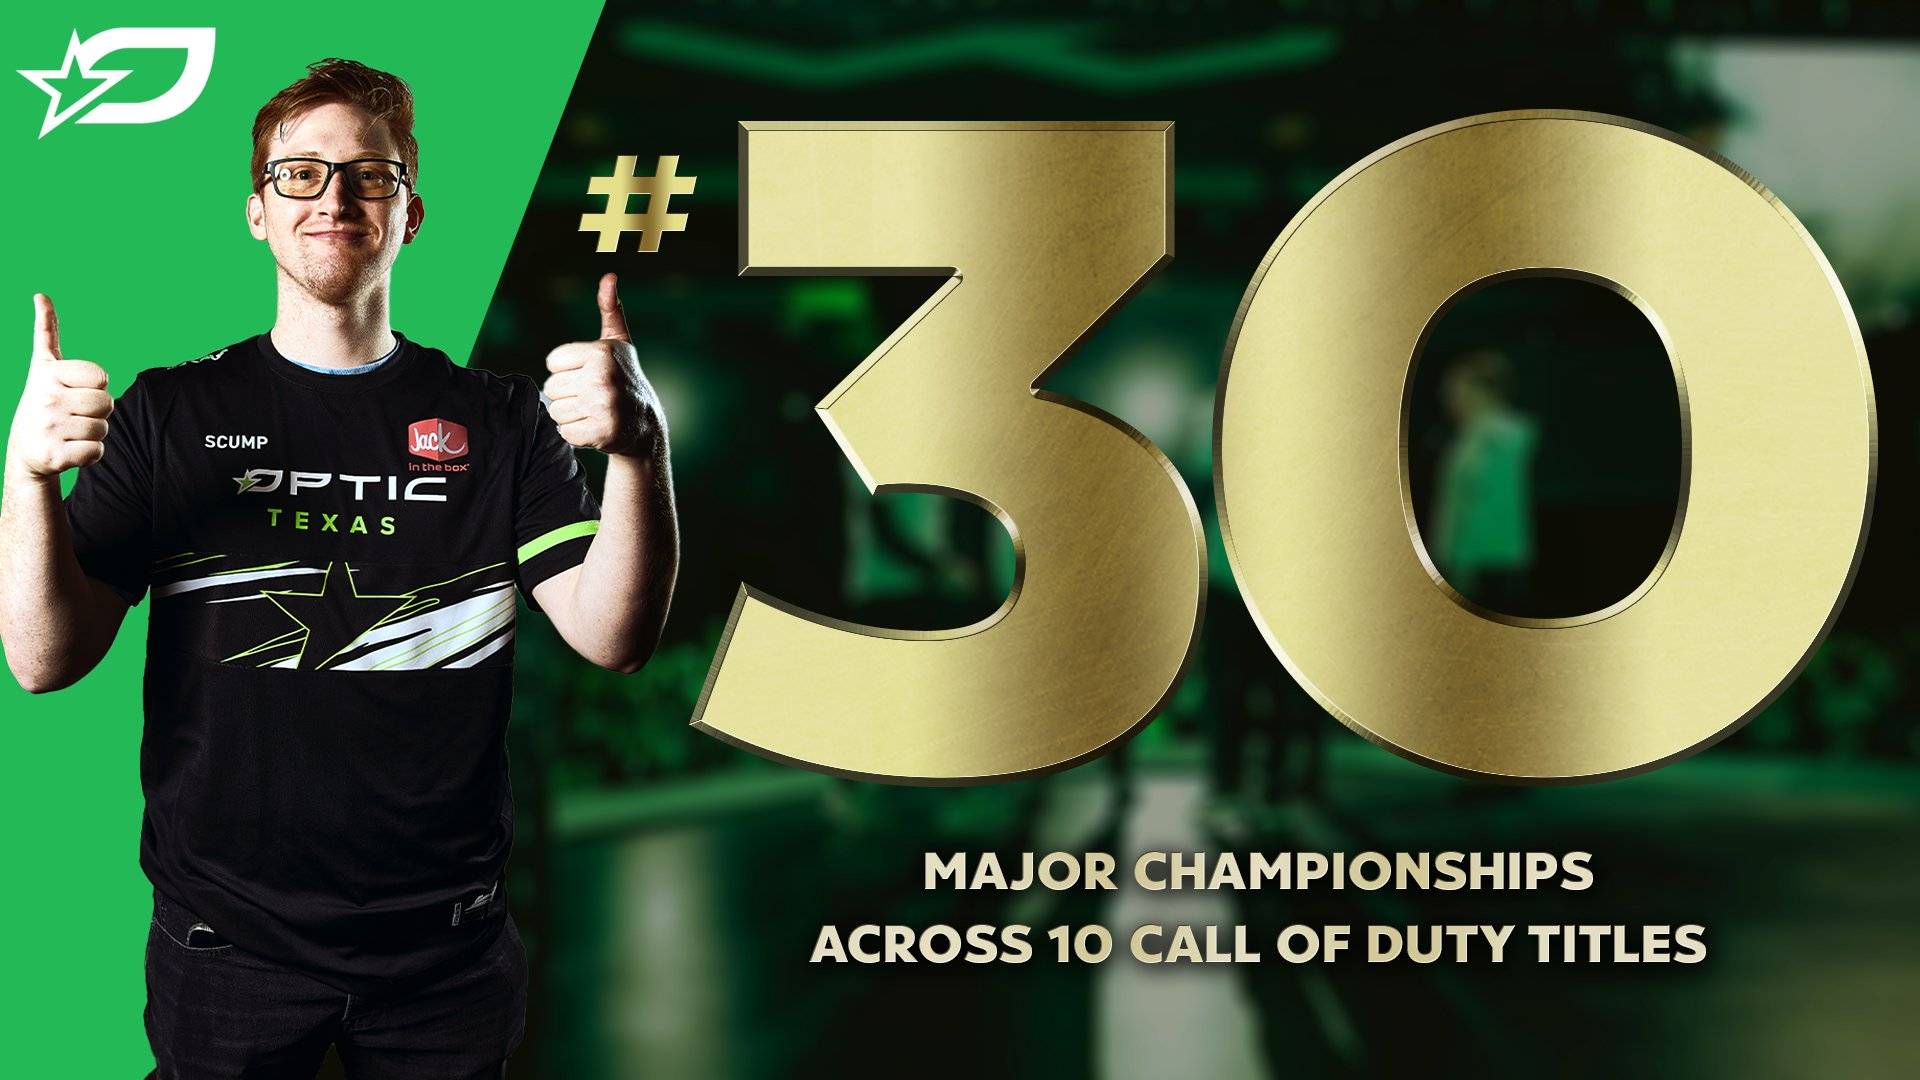 Call of Duty Legendary Player Scump Will Retire After 2023 Season